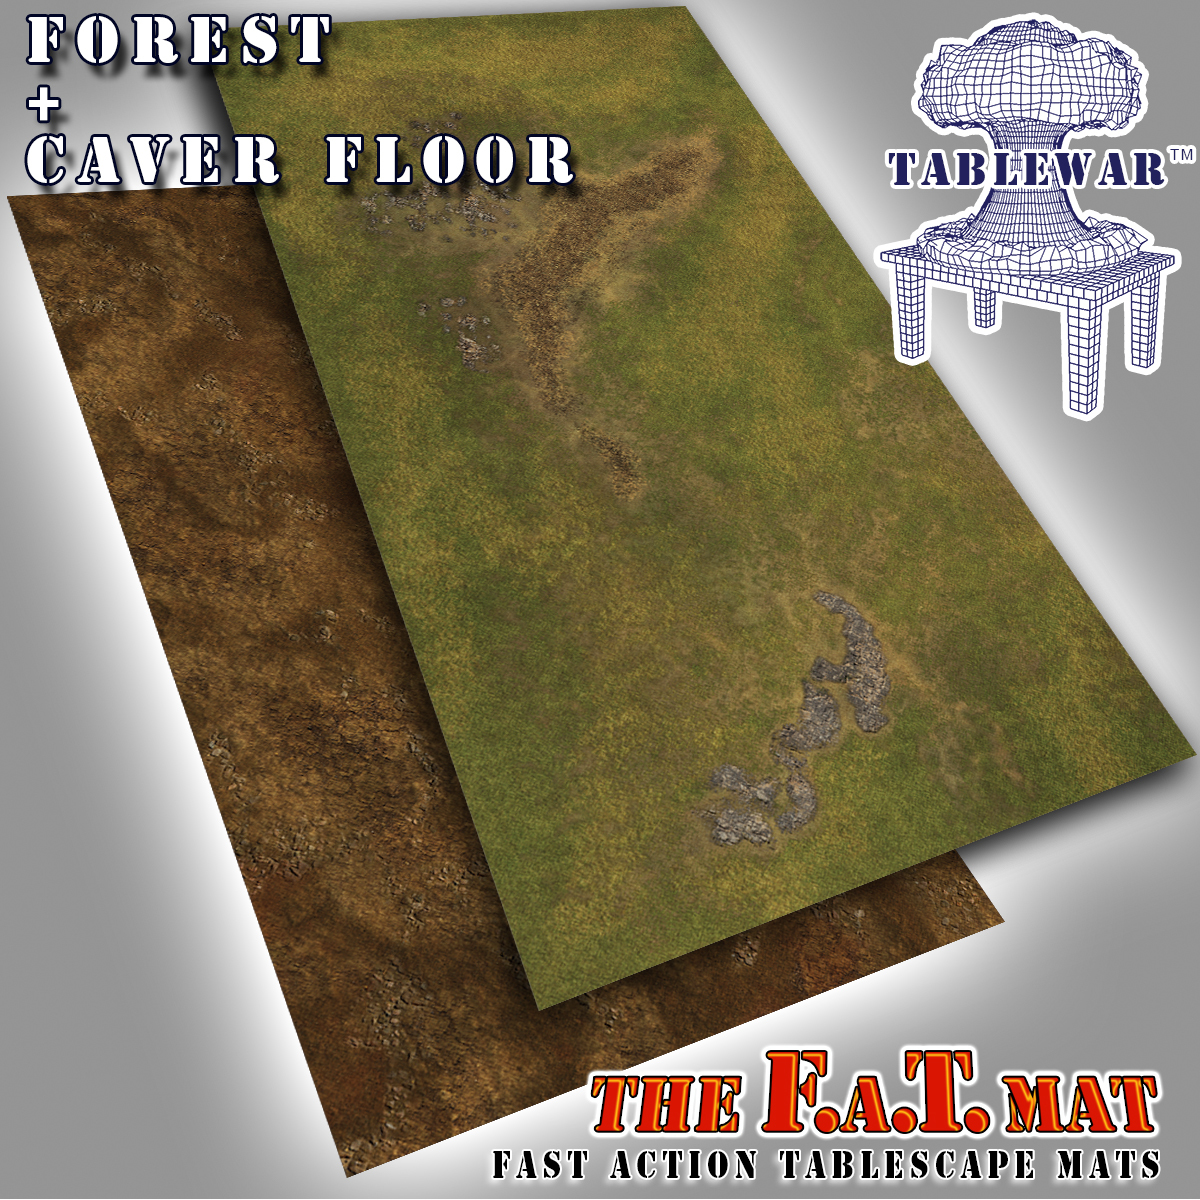 F.A.T. Mats: Forest + Cave Floor 6×3 